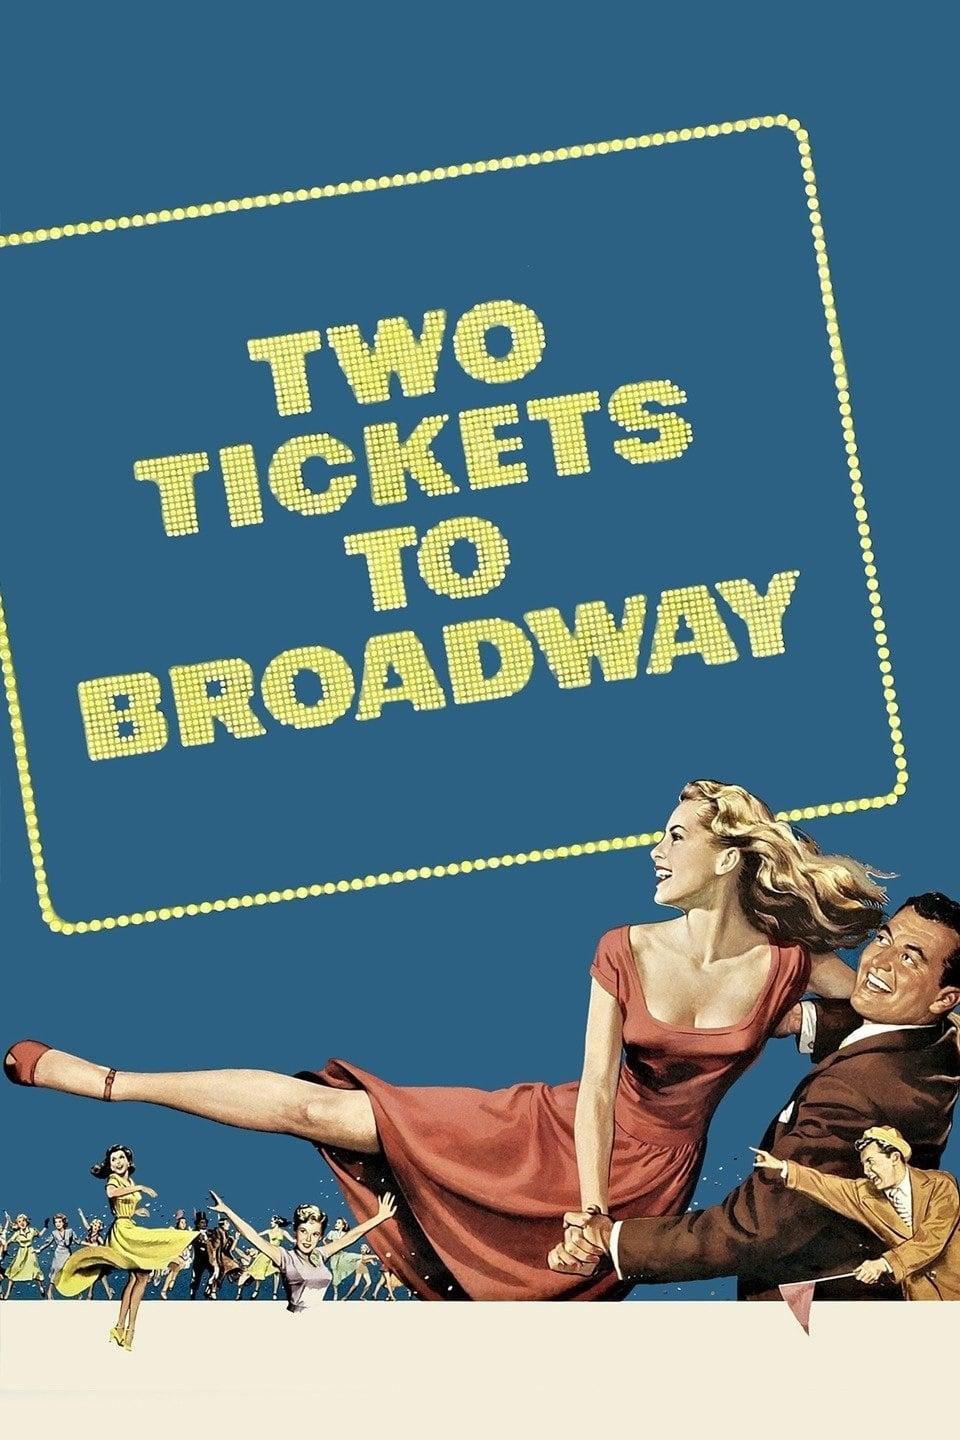 Two Tickets to Broadway poster